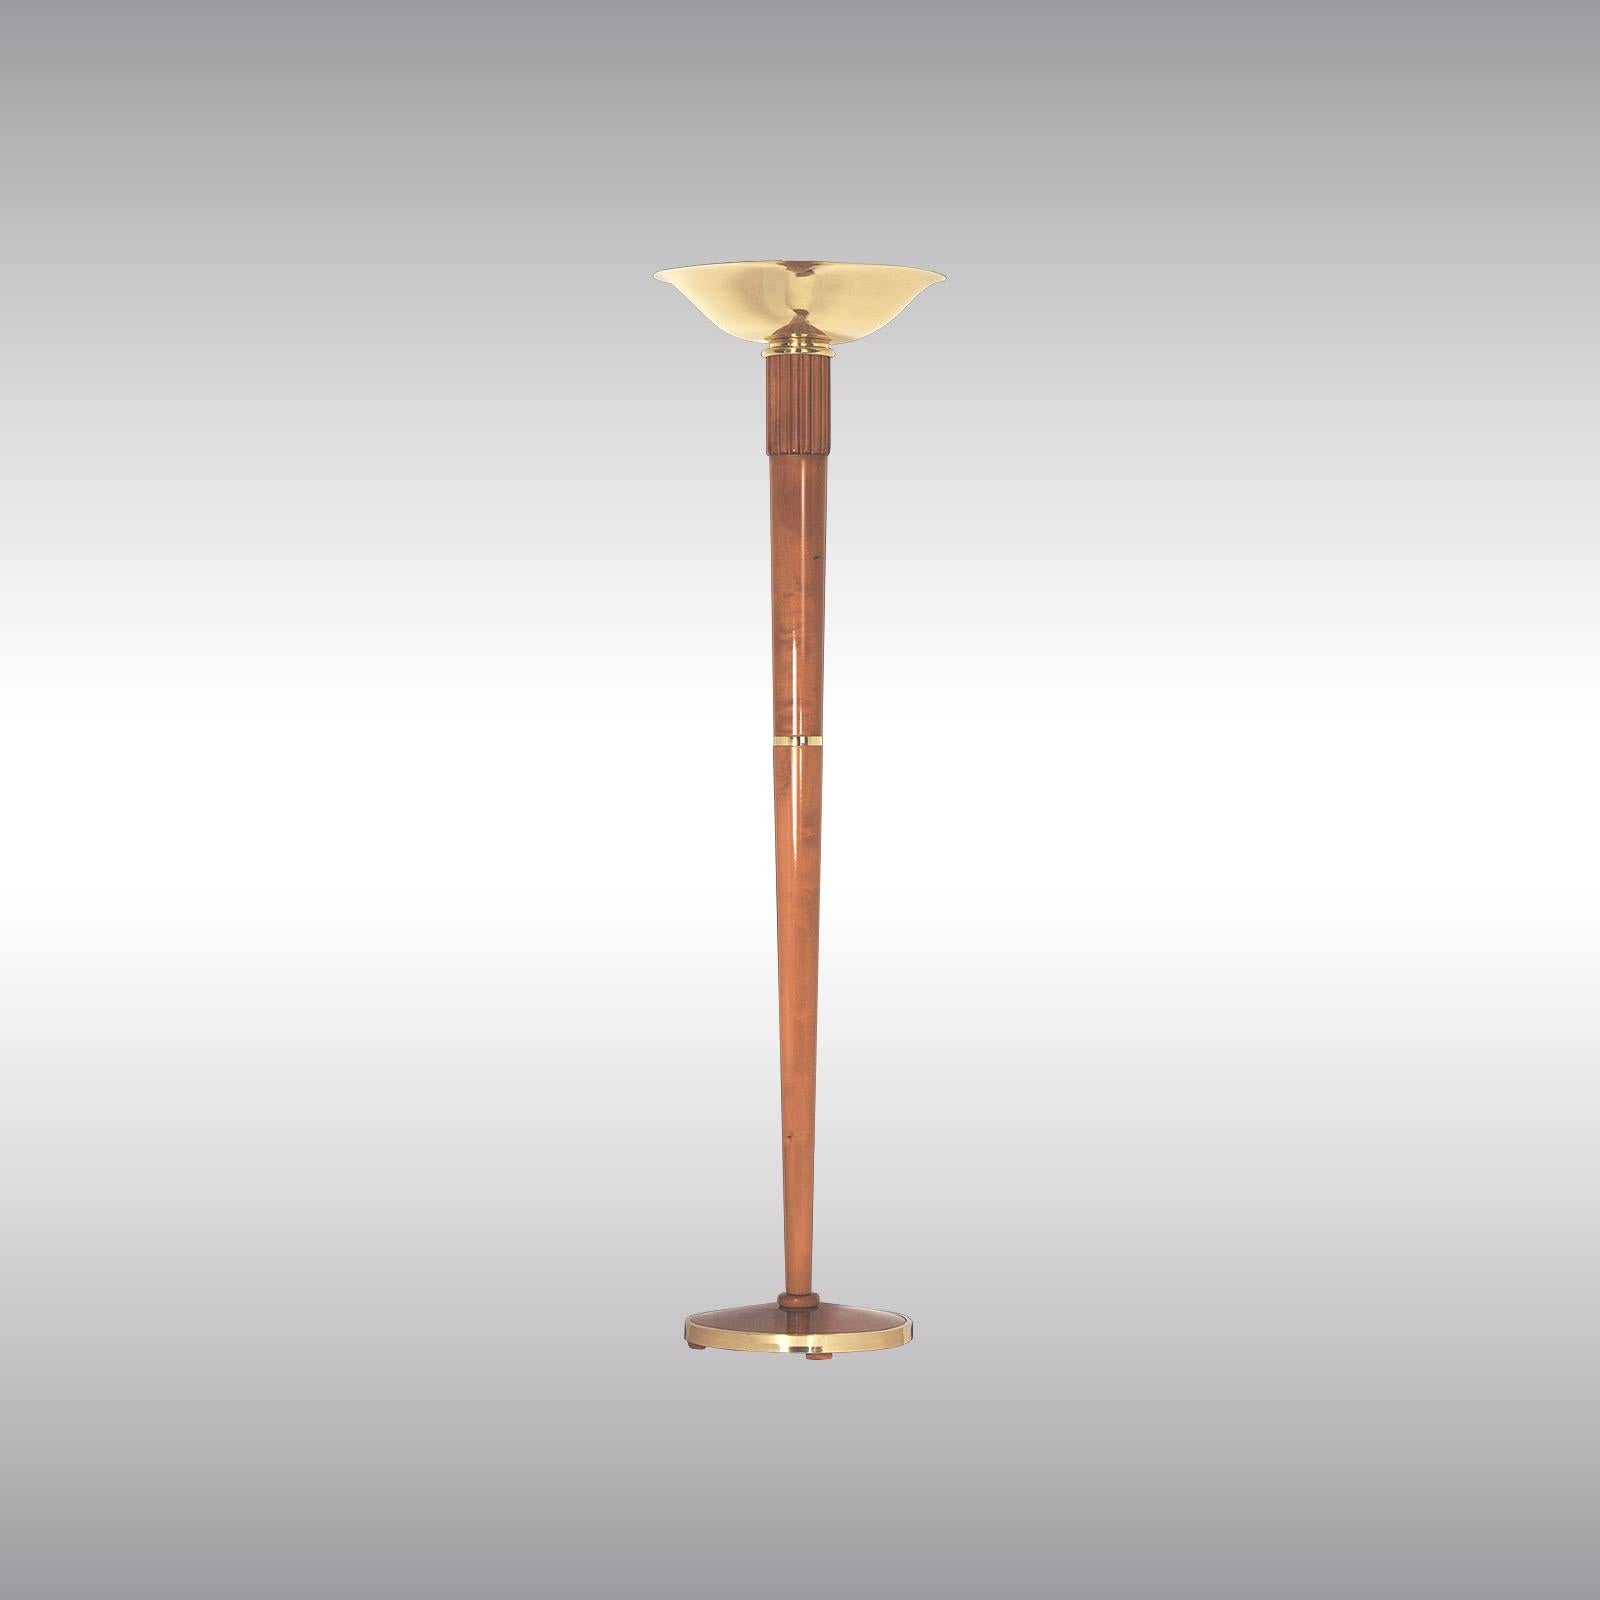 Contemporary Art Deco style -  Bauhaus - Wood and Brass Floor Lamp  For Sale